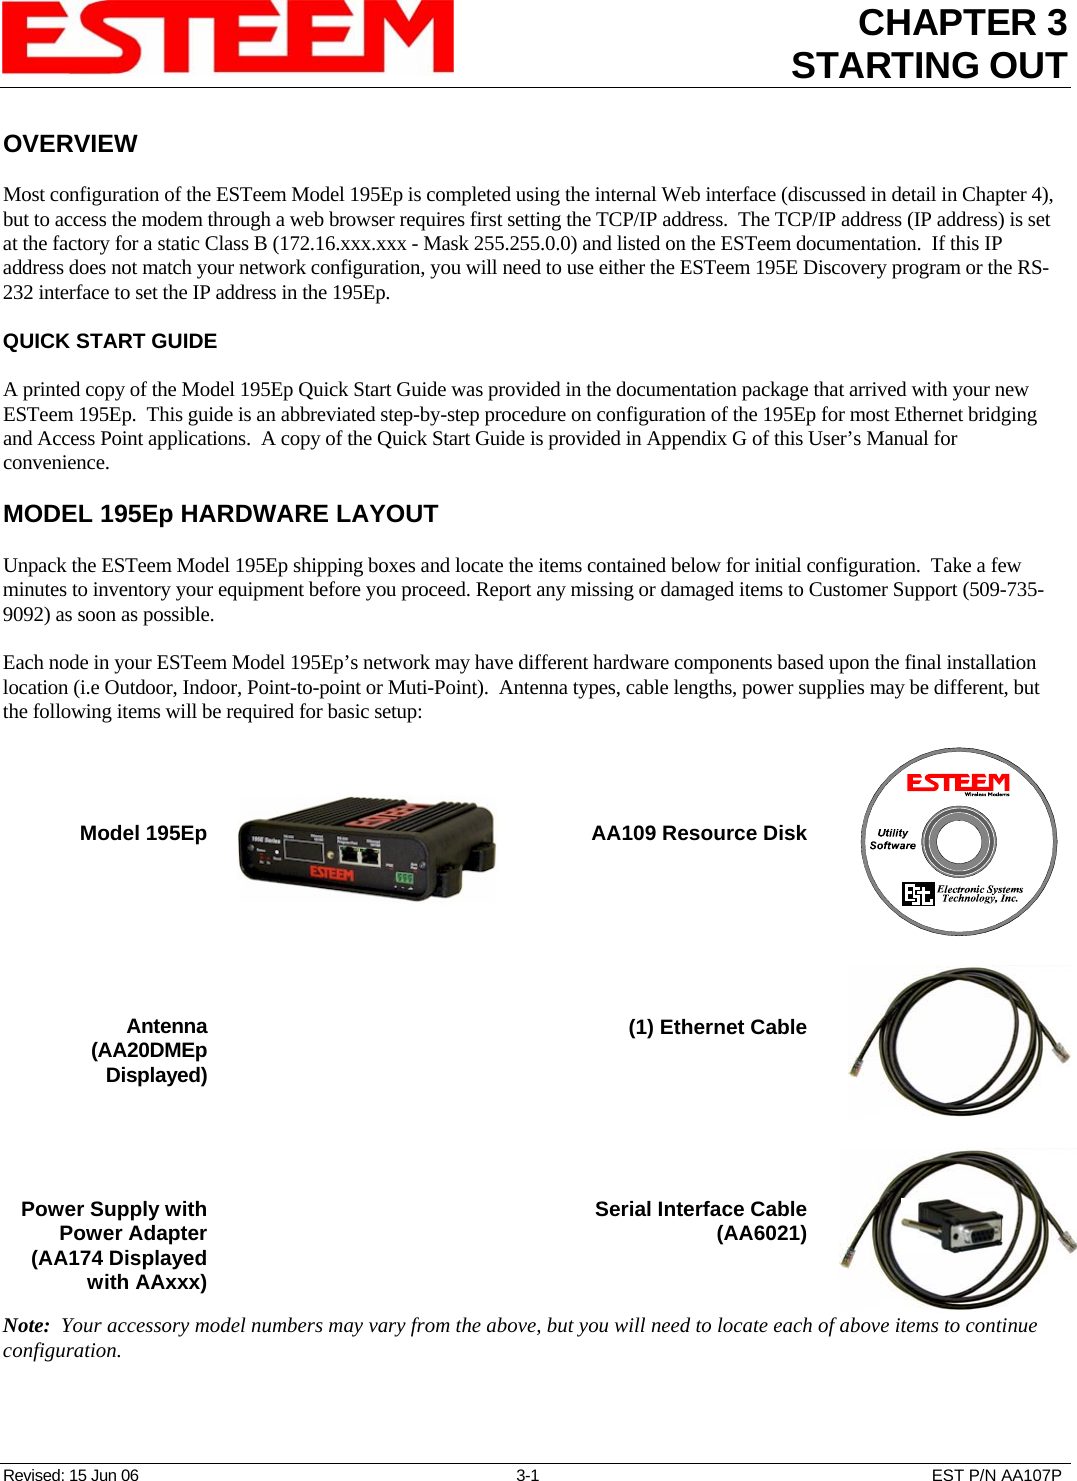 CHAPTER 3 STARTING OUT   Revised: 15 Jun 06  3-1  EST P/N AA107P OVERVIEW  Most configuration of the ESTeem Model 195Ep is completed using the internal Web interface (discussed in detail in Chapter 4), but to access the modem through a web browser requires first setting the TCP/IP address.  The TCP/IP address (IP address) is set at the factory for a static Class B (172.16.xxx.xxx - Mask 255.255.0.0) and listed on the ESTeem documentation.  If this IP address does not match your network configuration, you will need to use either the ESTeem 195E Discovery program or the RS-232 interface to set the IP address in the 195Ep.  QUICK START GUIDE  A printed copy of the Model 195Ep Quick Start Guide was provided in the documentation package that arrived with your new ESTeem 195Ep.  This guide is an abbreviated step-by-step procedure on configuration of the 195Ep for most Ethernet bridging and Access Point applications.  A copy of the Quick Start Guide is provided in Appendix G of this User’s Manual for convenience.  MODEL 195Ep HARDWARE LAYOUT  Unpack the ESTeem Model 195Ep shipping boxes and locate the items contained below for initial configuration.  Take a few minutes to inventory your equipment before you proceed. Report any missing or damaged items to Customer Support (509-735-9092) as soon as possible.     Each node in your ESTeem Model 195Ep’s network may have different hardware components based upon the final installation location (i.e Outdoor, Indoor, Point-to-point or Muti-Point).  Antenna types, cable lengths, power supplies may be different, but the following items will be required for basic setup:     Model 195Ep       AA109 Resource Disk         Antenna  (AA20DMEp Displayed)                    (1) Ethernet Cable         Power Supply with Power Adapter (AA174 Displayed with AAxxx)    Serial Interface Cable (AA6021)  Note:  Your accessory model numbers may vary from the above, but you will need to locate each of above items to continue configuration.    